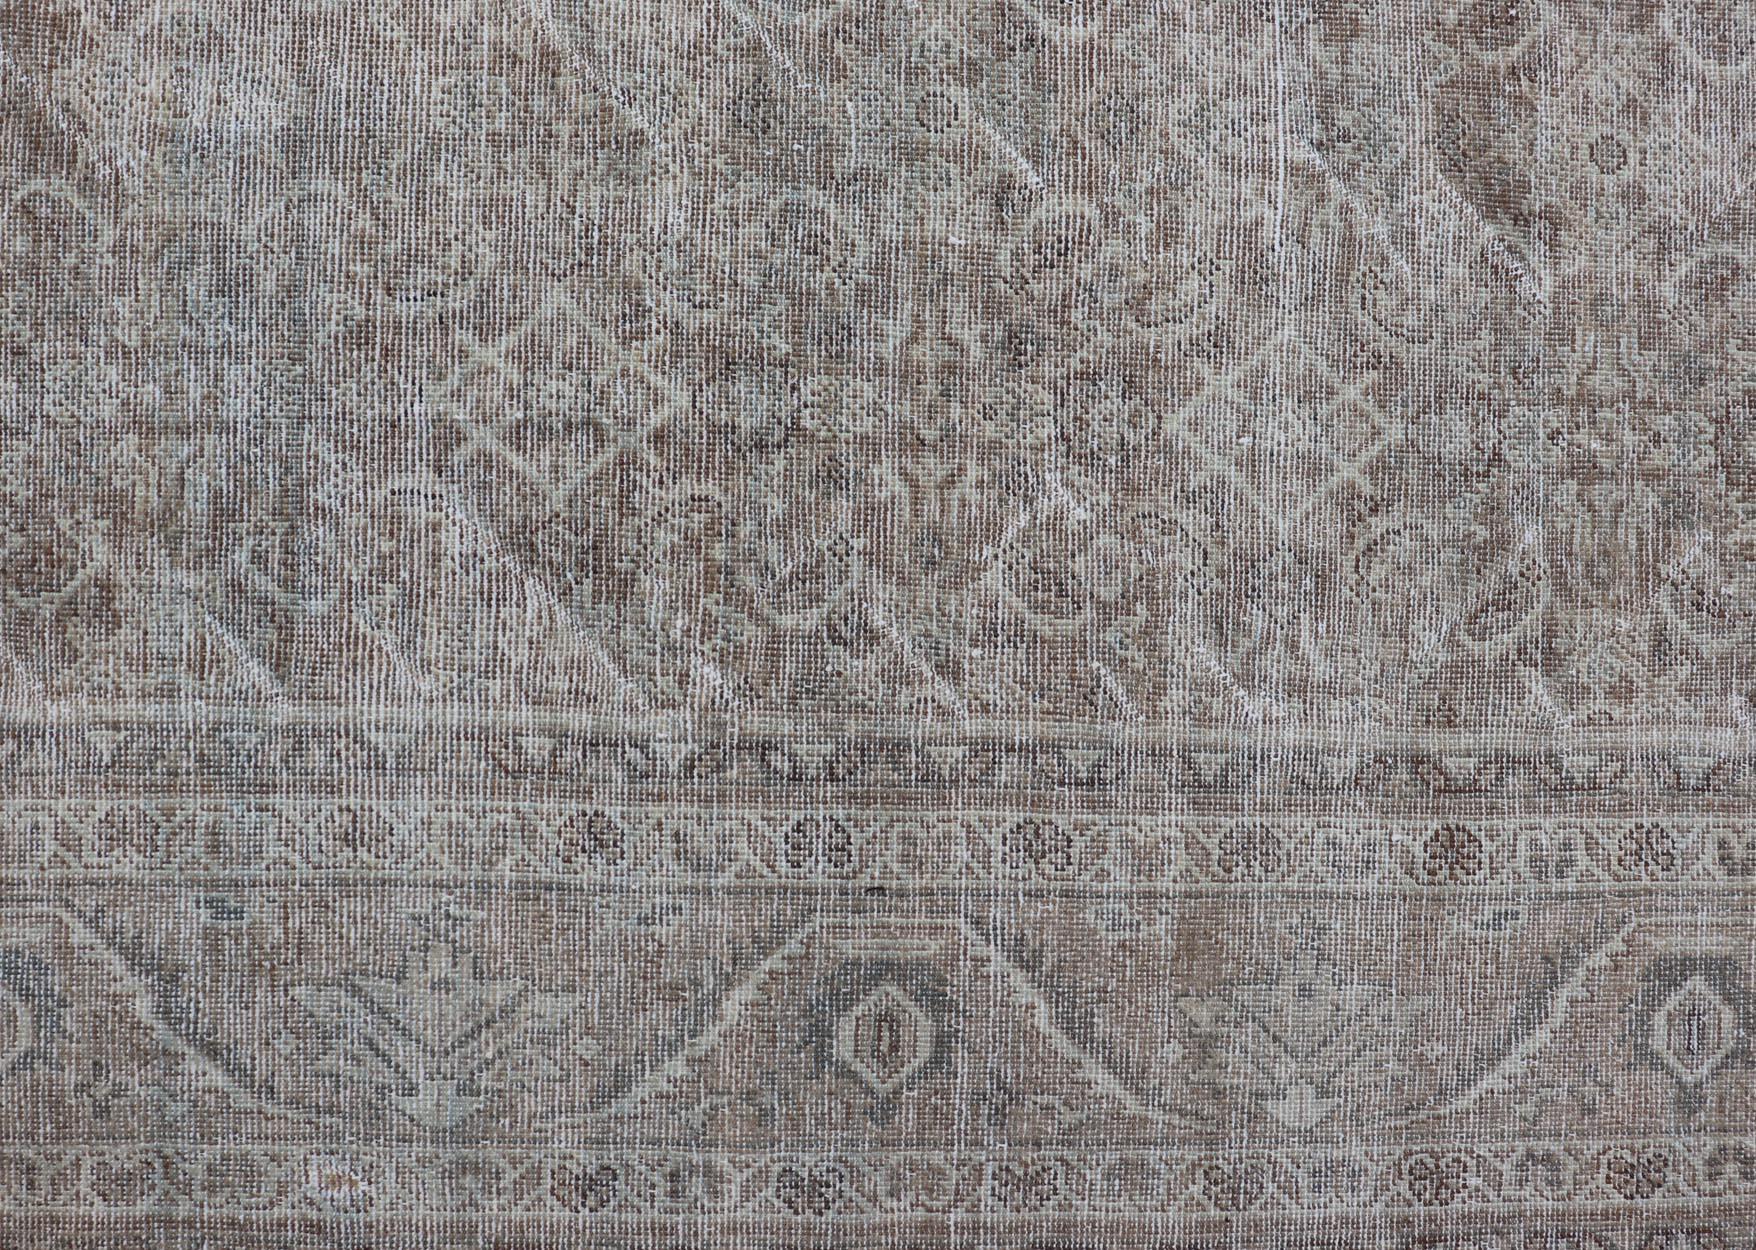 Antique Persian Distressed Mahal Rug in Warm Earthy Tones with All-Over Design. Keivan Woven Arts / rug V21-0402, country of origin / type: Iran / Mahal, circa 1920

Measures: 10'4 x 13'3 

This beautiful distressed antique Persian Mahal rug